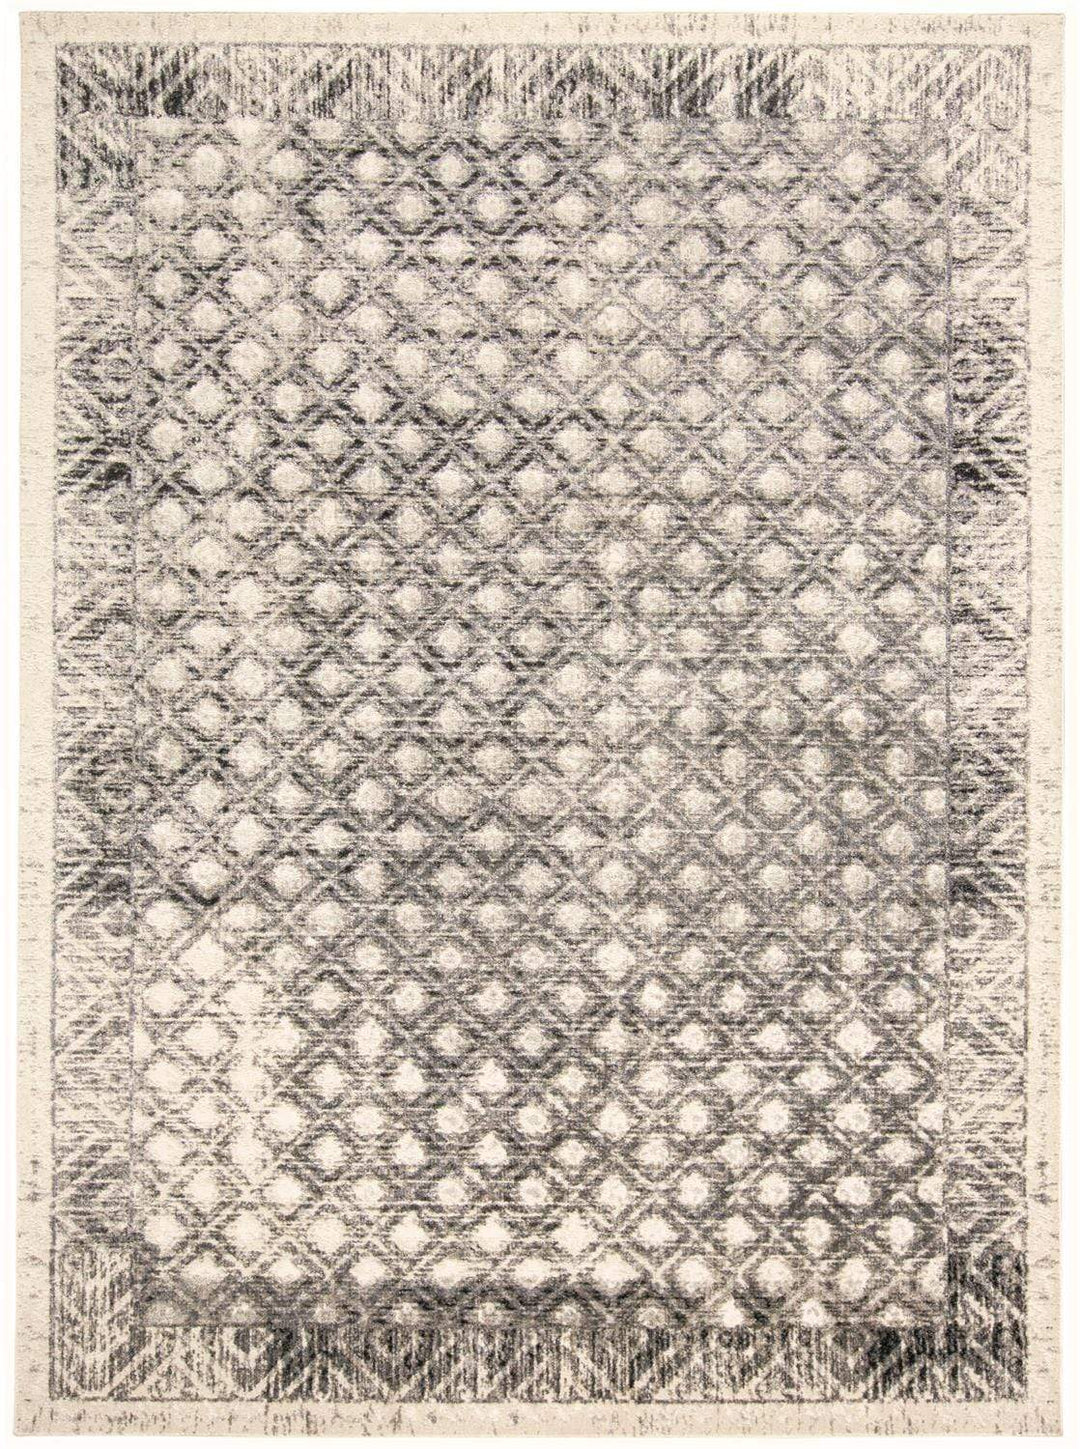 Feizy Feizy Kano Distressed Ornamental Diamonds Rug - Gray & Ivory - Available in 8 Sizes 2'-2" x 3' 8643875FGRYCHLA08